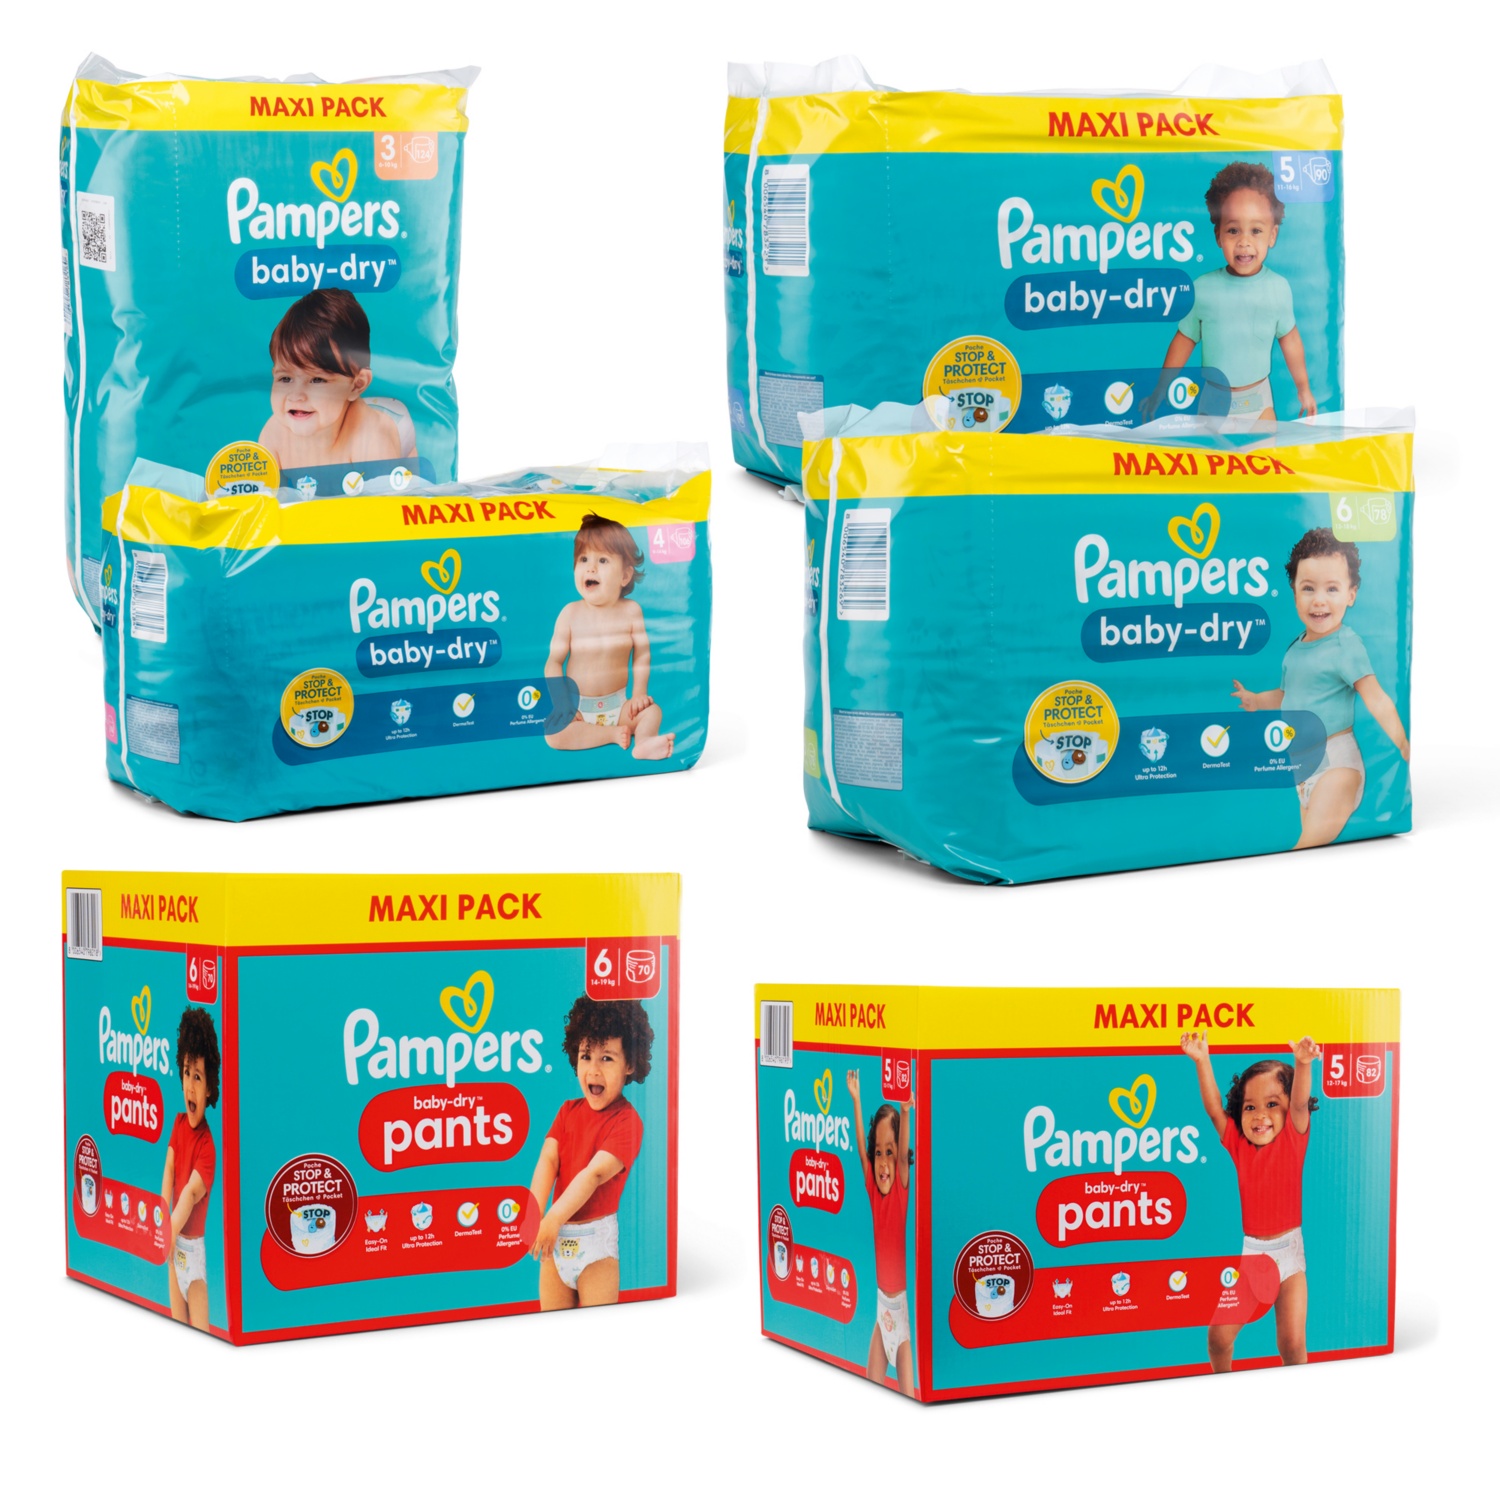 PAMPERS Pannolini «Baby Dry» in confezione maxi